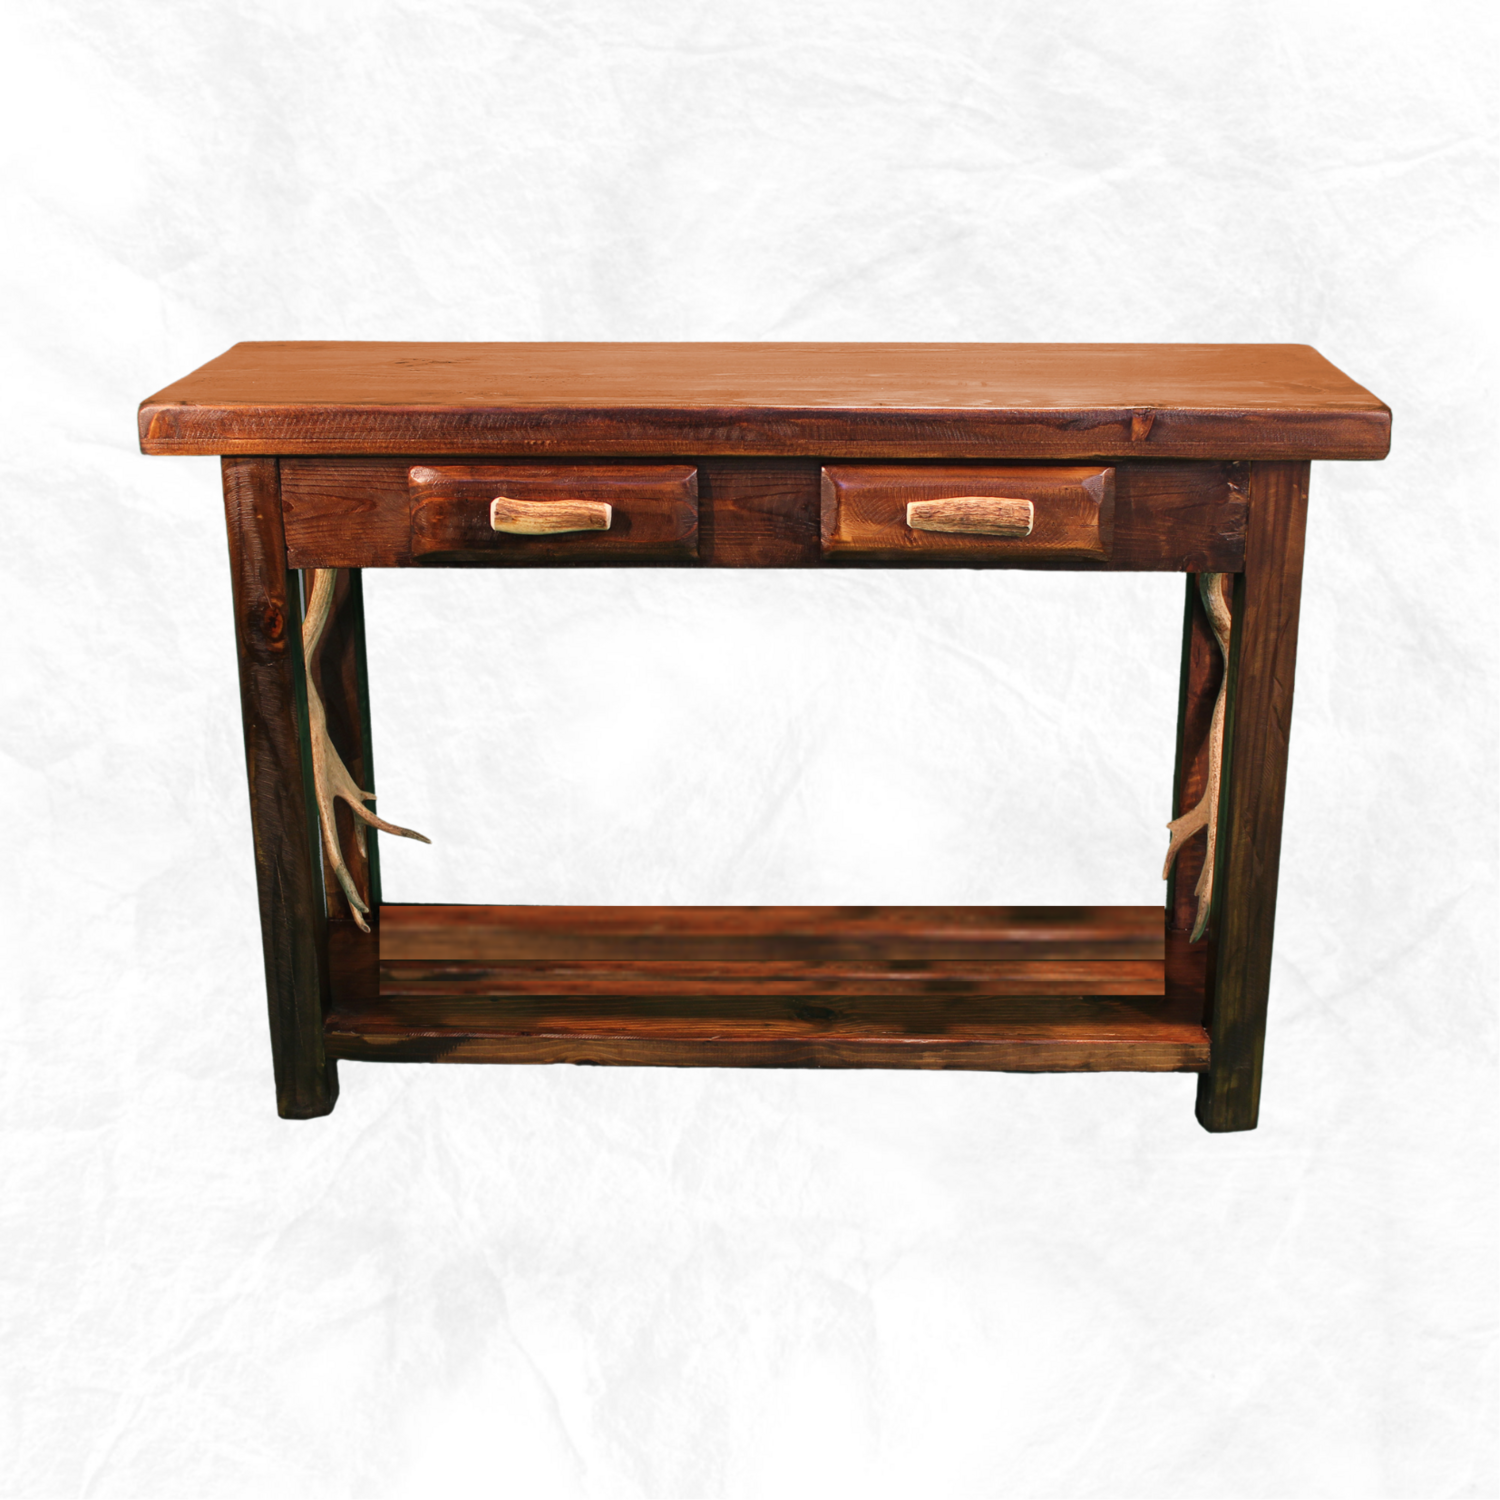 Pine Sofa Table with Antler Handles